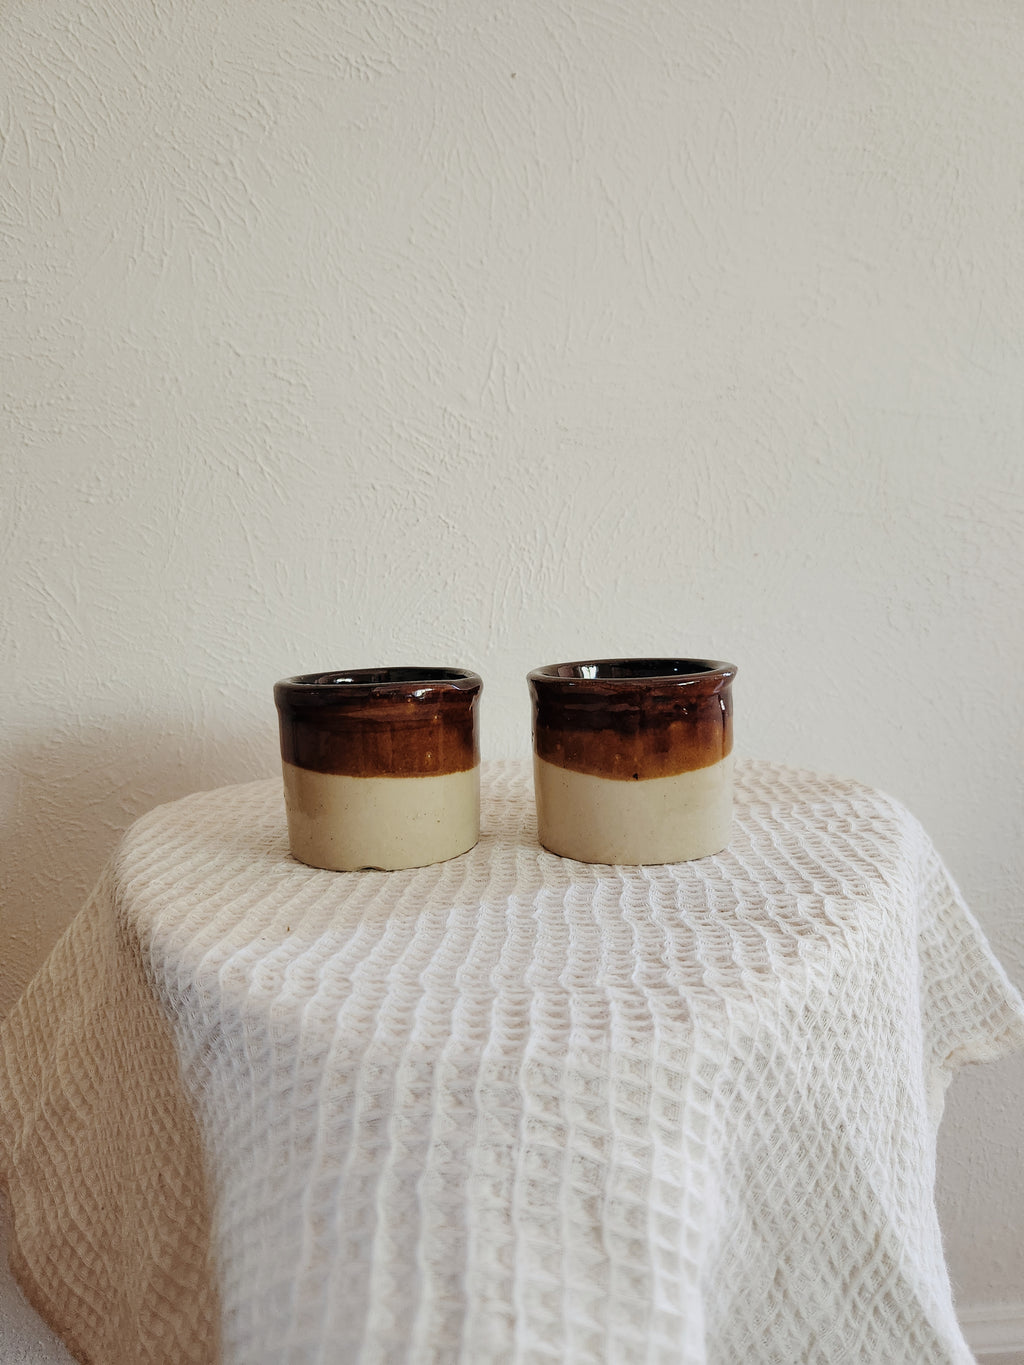 Vintage Vessels | Sold Together | Modern day expresso cups | coffee bar | mini planters